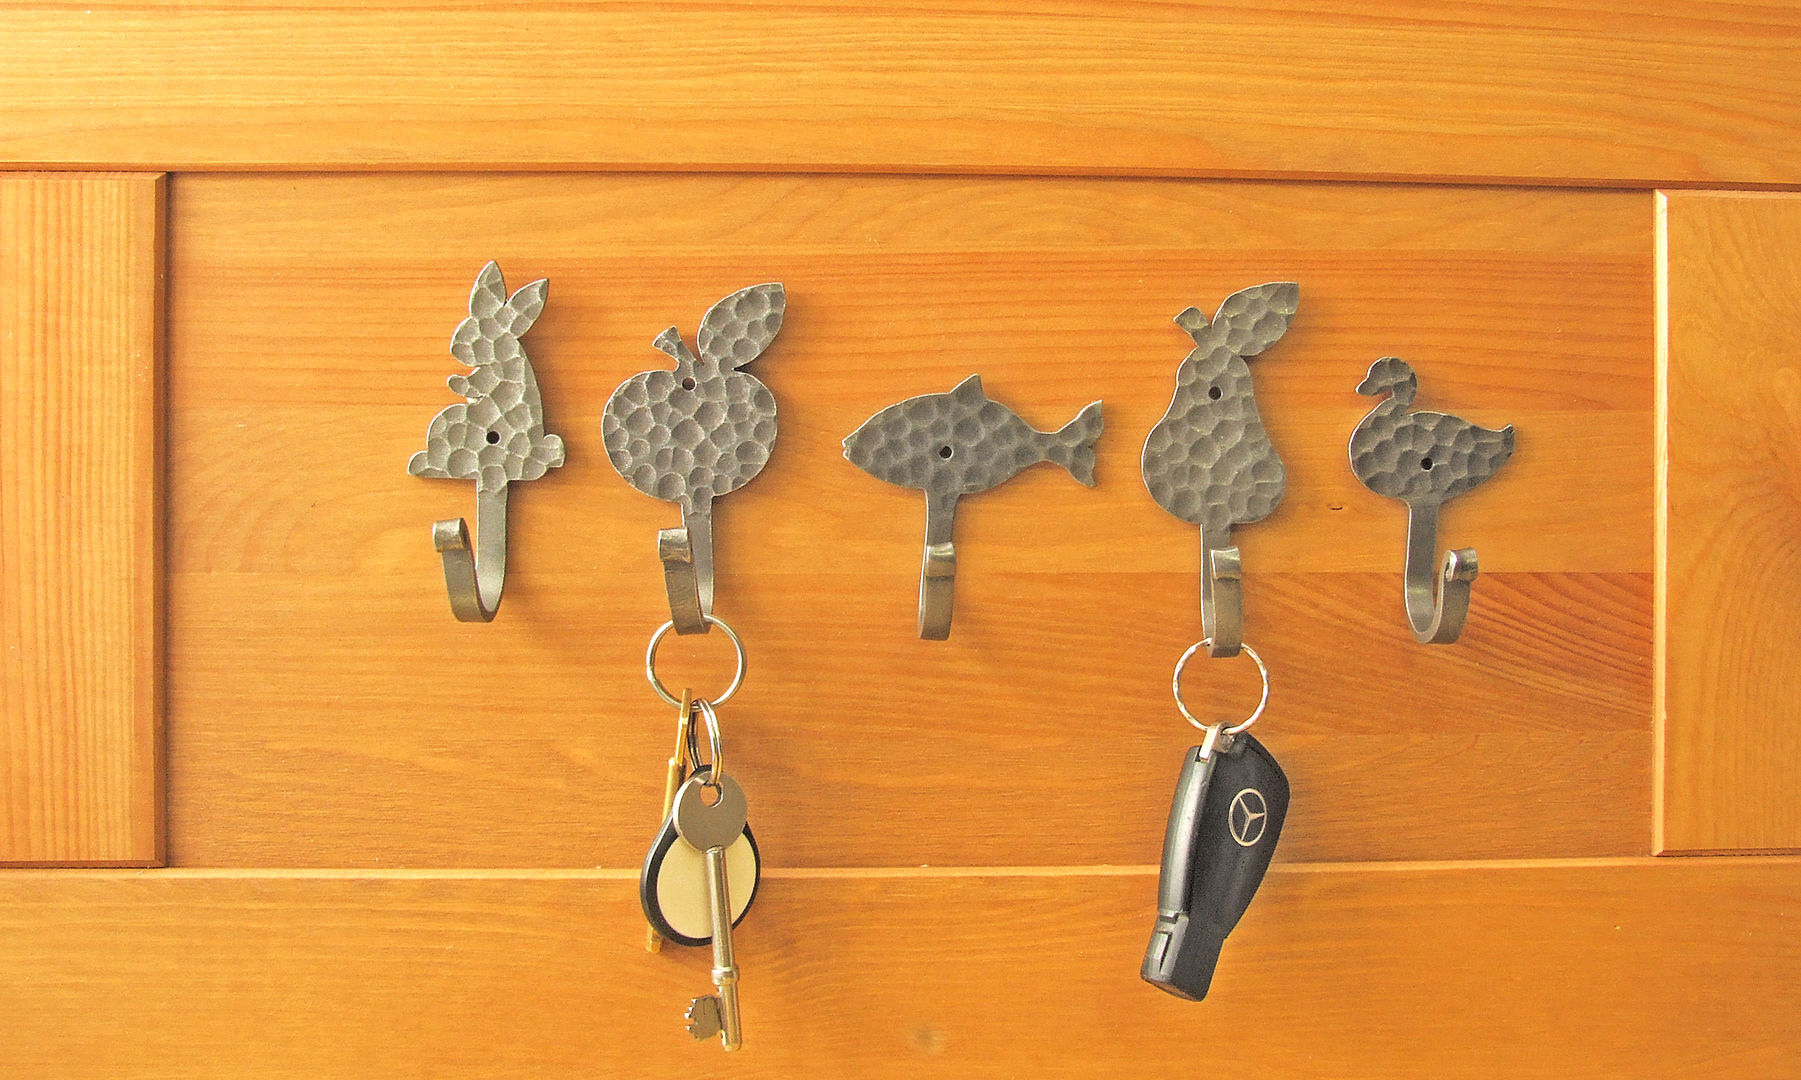 Hooks for keys or cups or for what ever you want... Clayton Munroe Porte Ferro / Acciaio Pomelli, Maniglie & Accessori